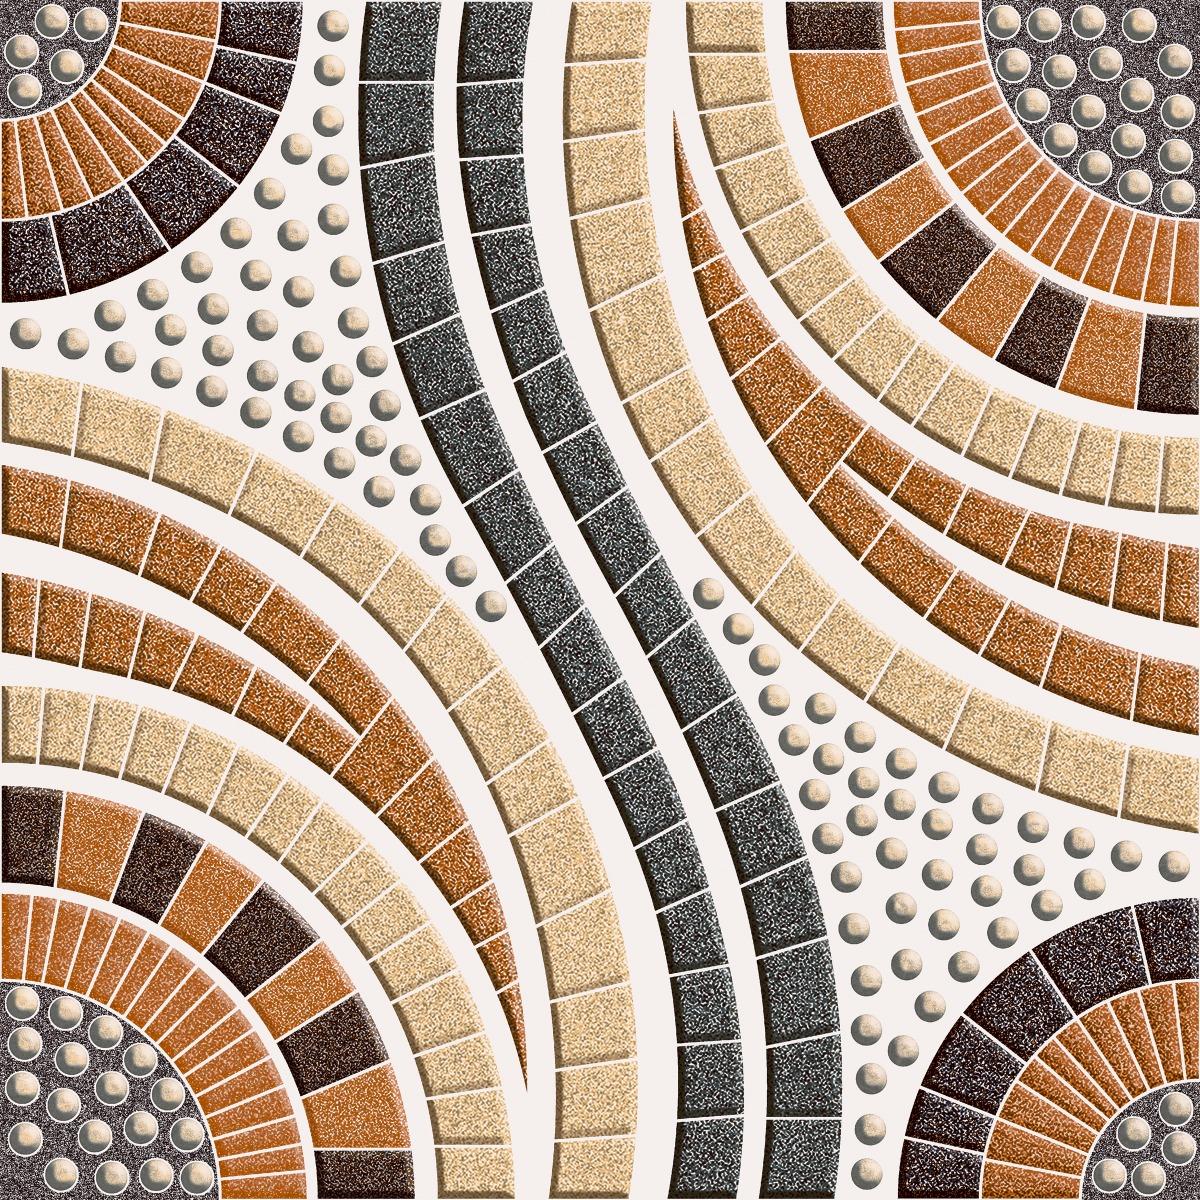 Beige Tiles for Balcony Tiles, Swimming Pool Tiles, Parking Tiles, Pathway Tiles, Commercial/Office, Outdoor Area